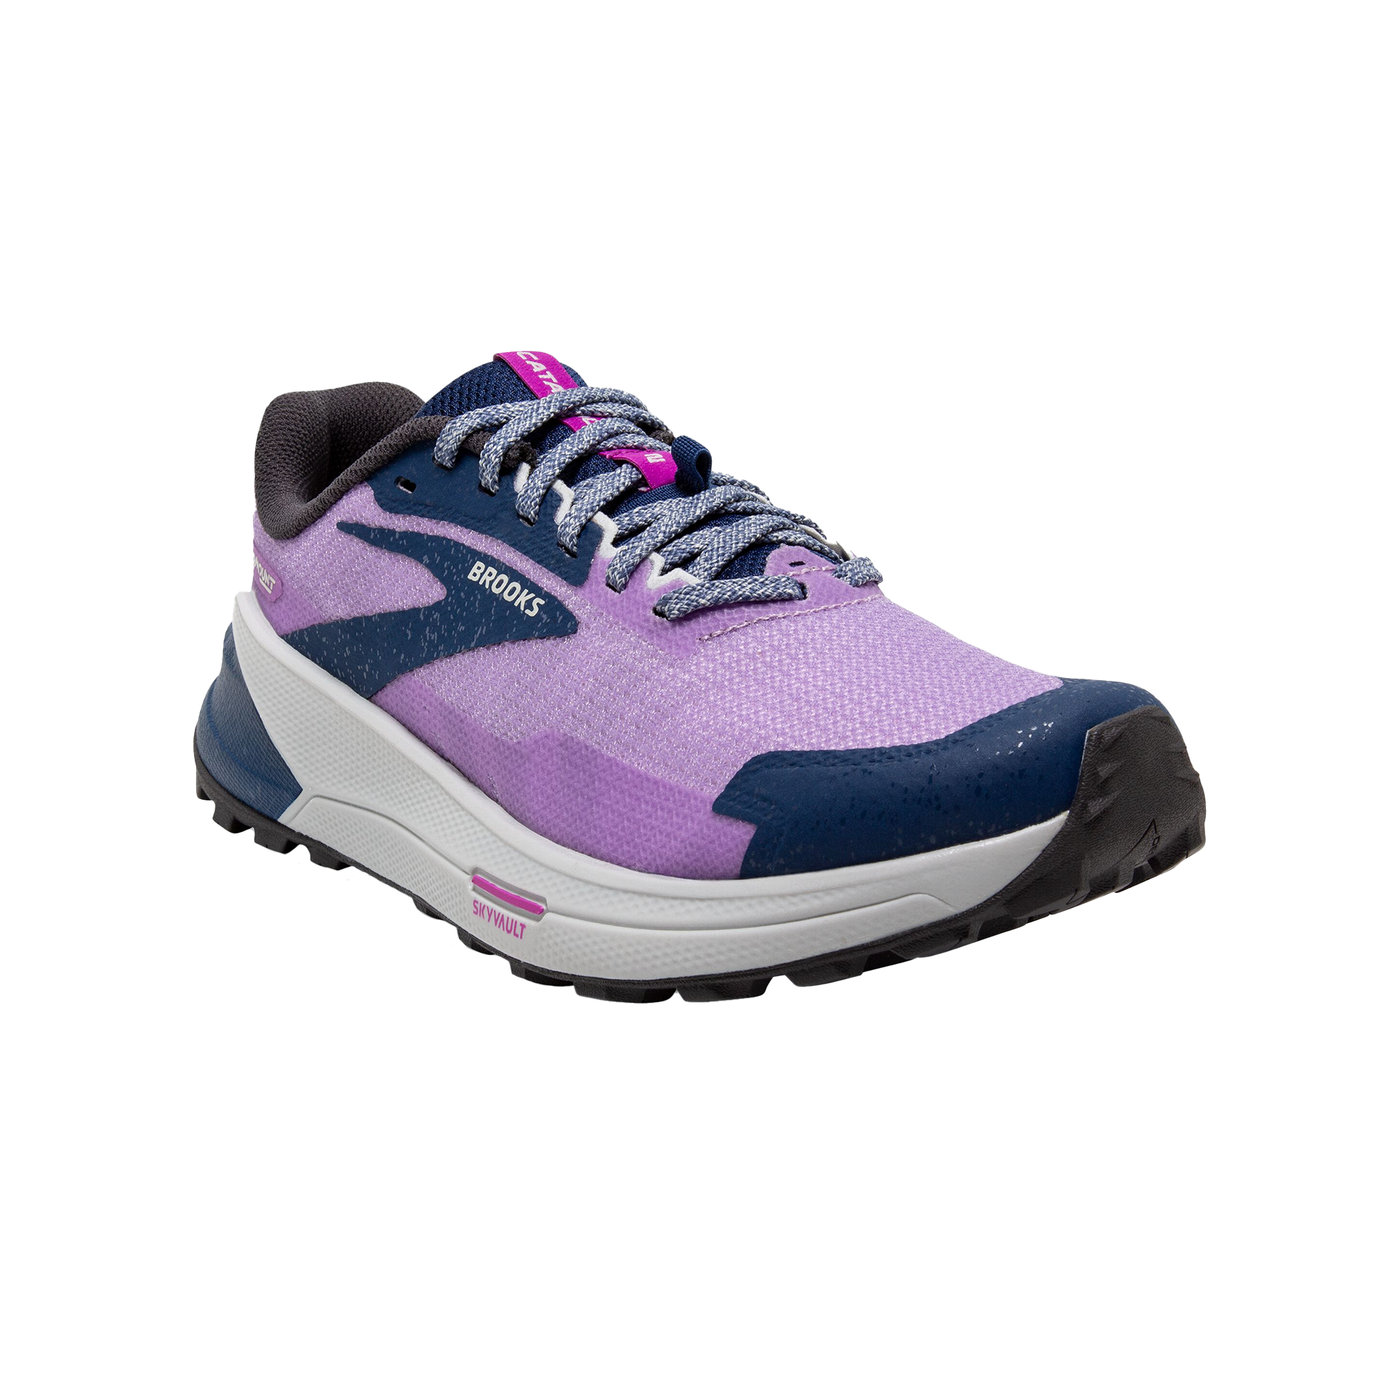 Brooks Womens Catamount 2 - Violet/Navy/Oyster - Trail